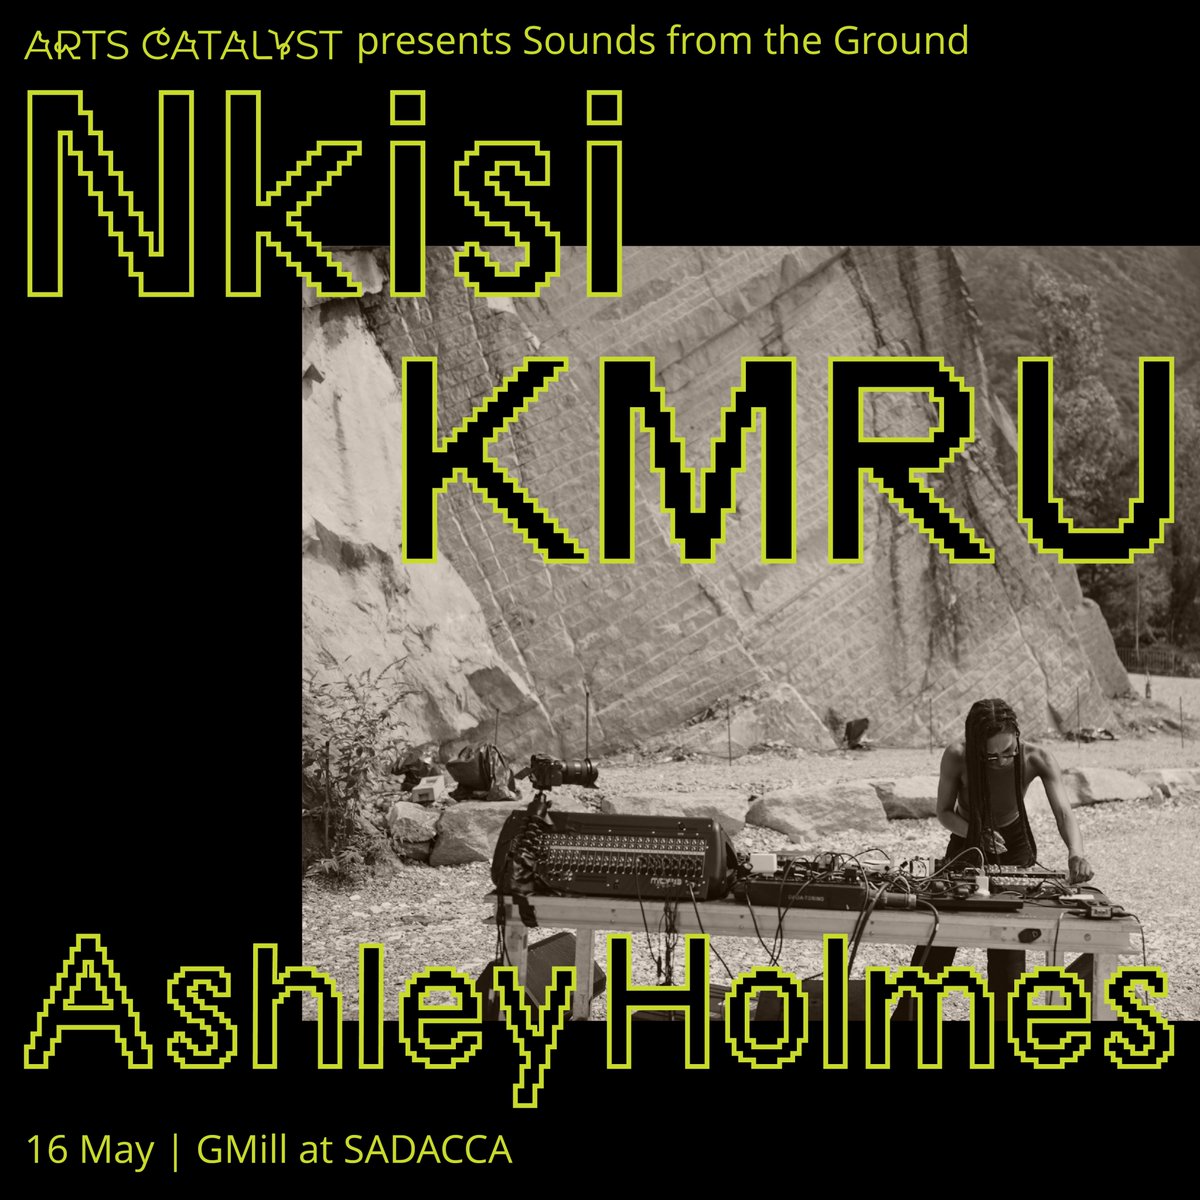 We are thrilled to announce the next Sounds from the Ground with @nkisiii @joseph_kamaru and @ashleyholmes__ Join us on 16 May for a hypnotic evening of live electronic music at @sadaccawicker with sound by Sinai Sound. Early Bird tickets on sale now! bit.ly/3V9AqvP